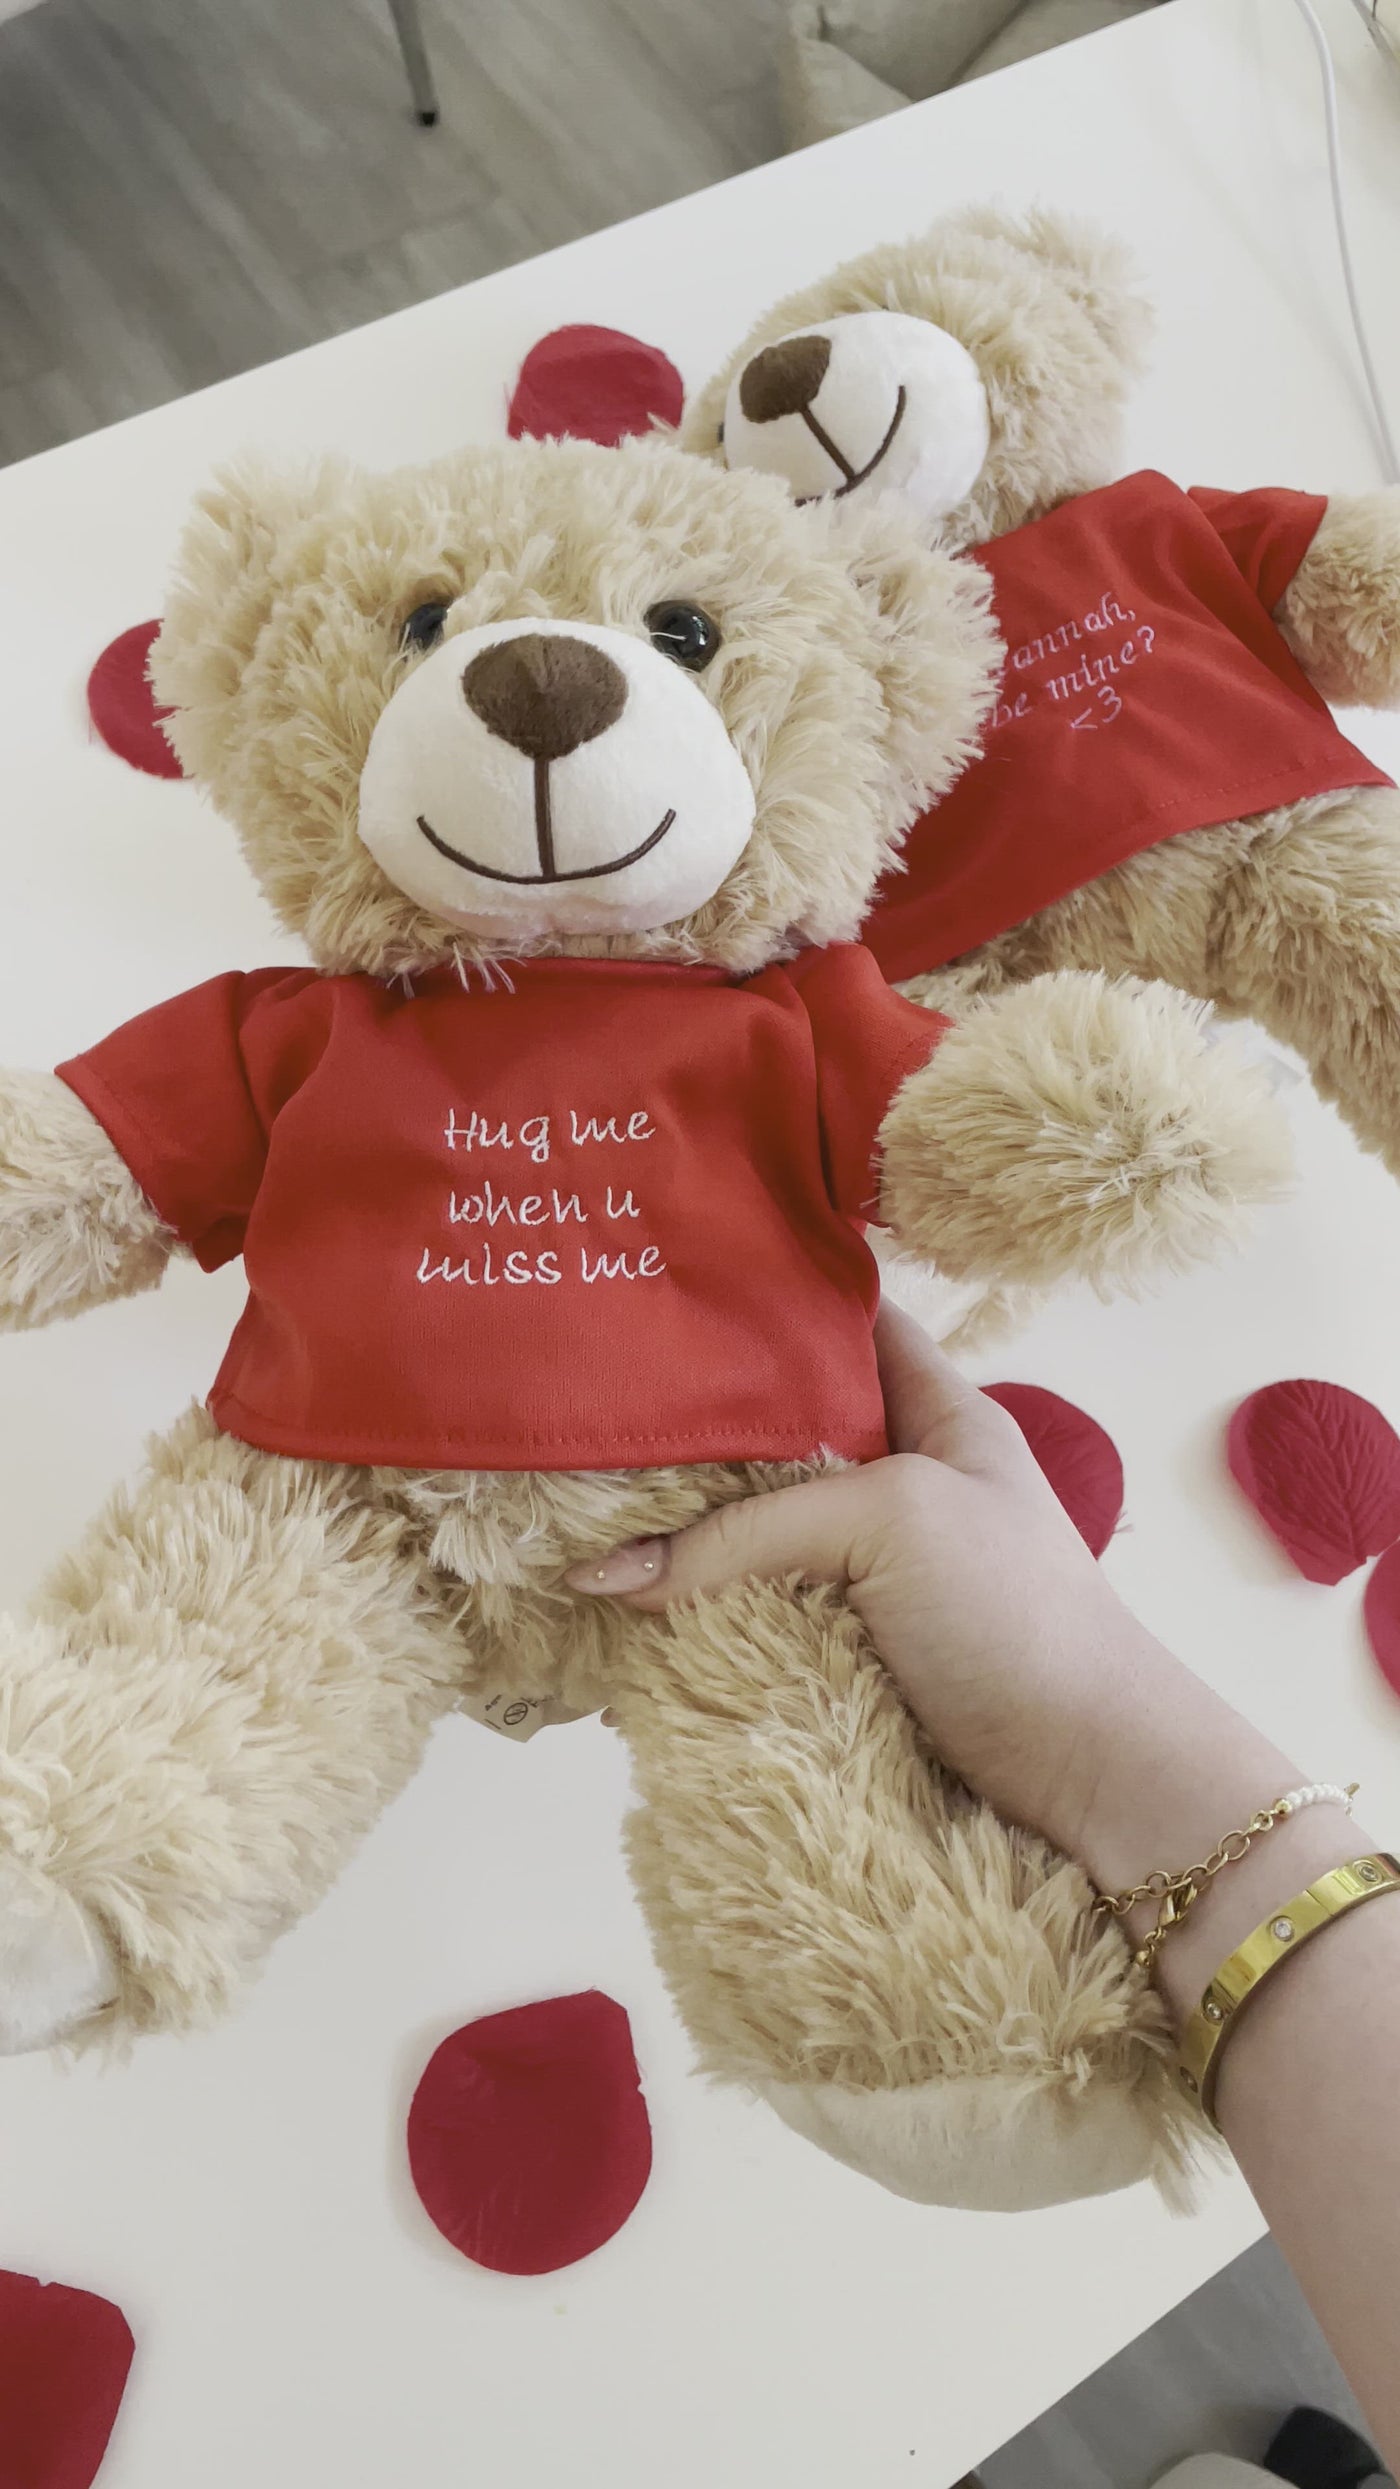 Personalized Teddy Bear gift embroidered image outline